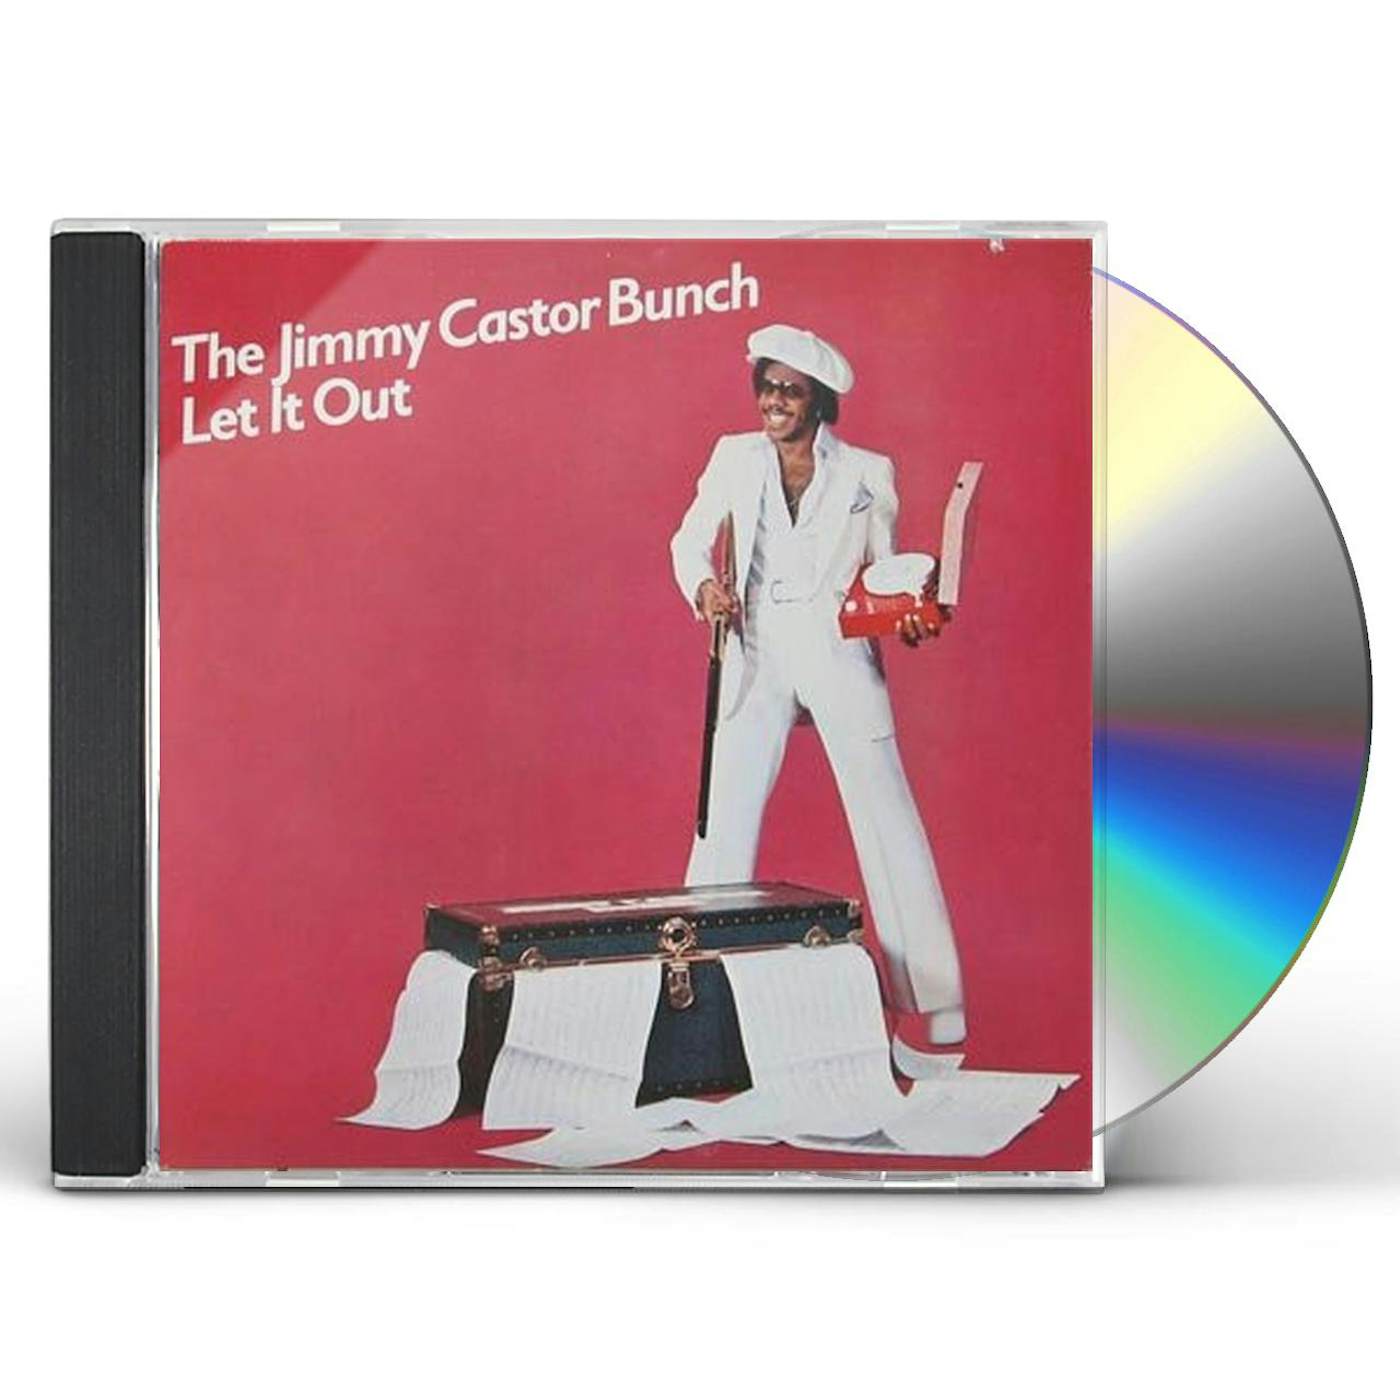 The Jimmy Castor Bunch LET IT OUT CD